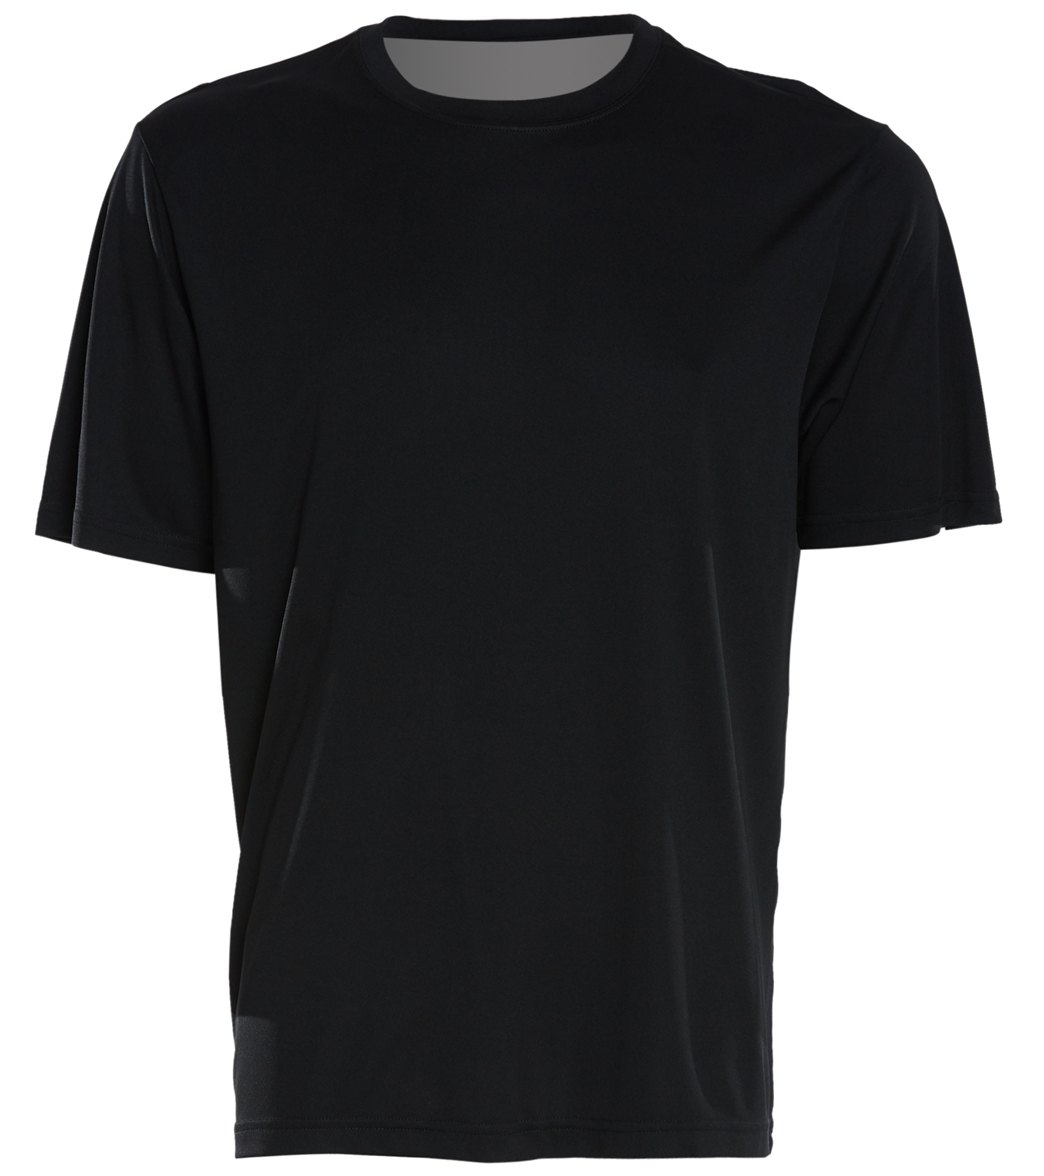 Men's Posicharge Competitortm Tee Shirt - Black X-Small Polyester - Swimoutlet.com